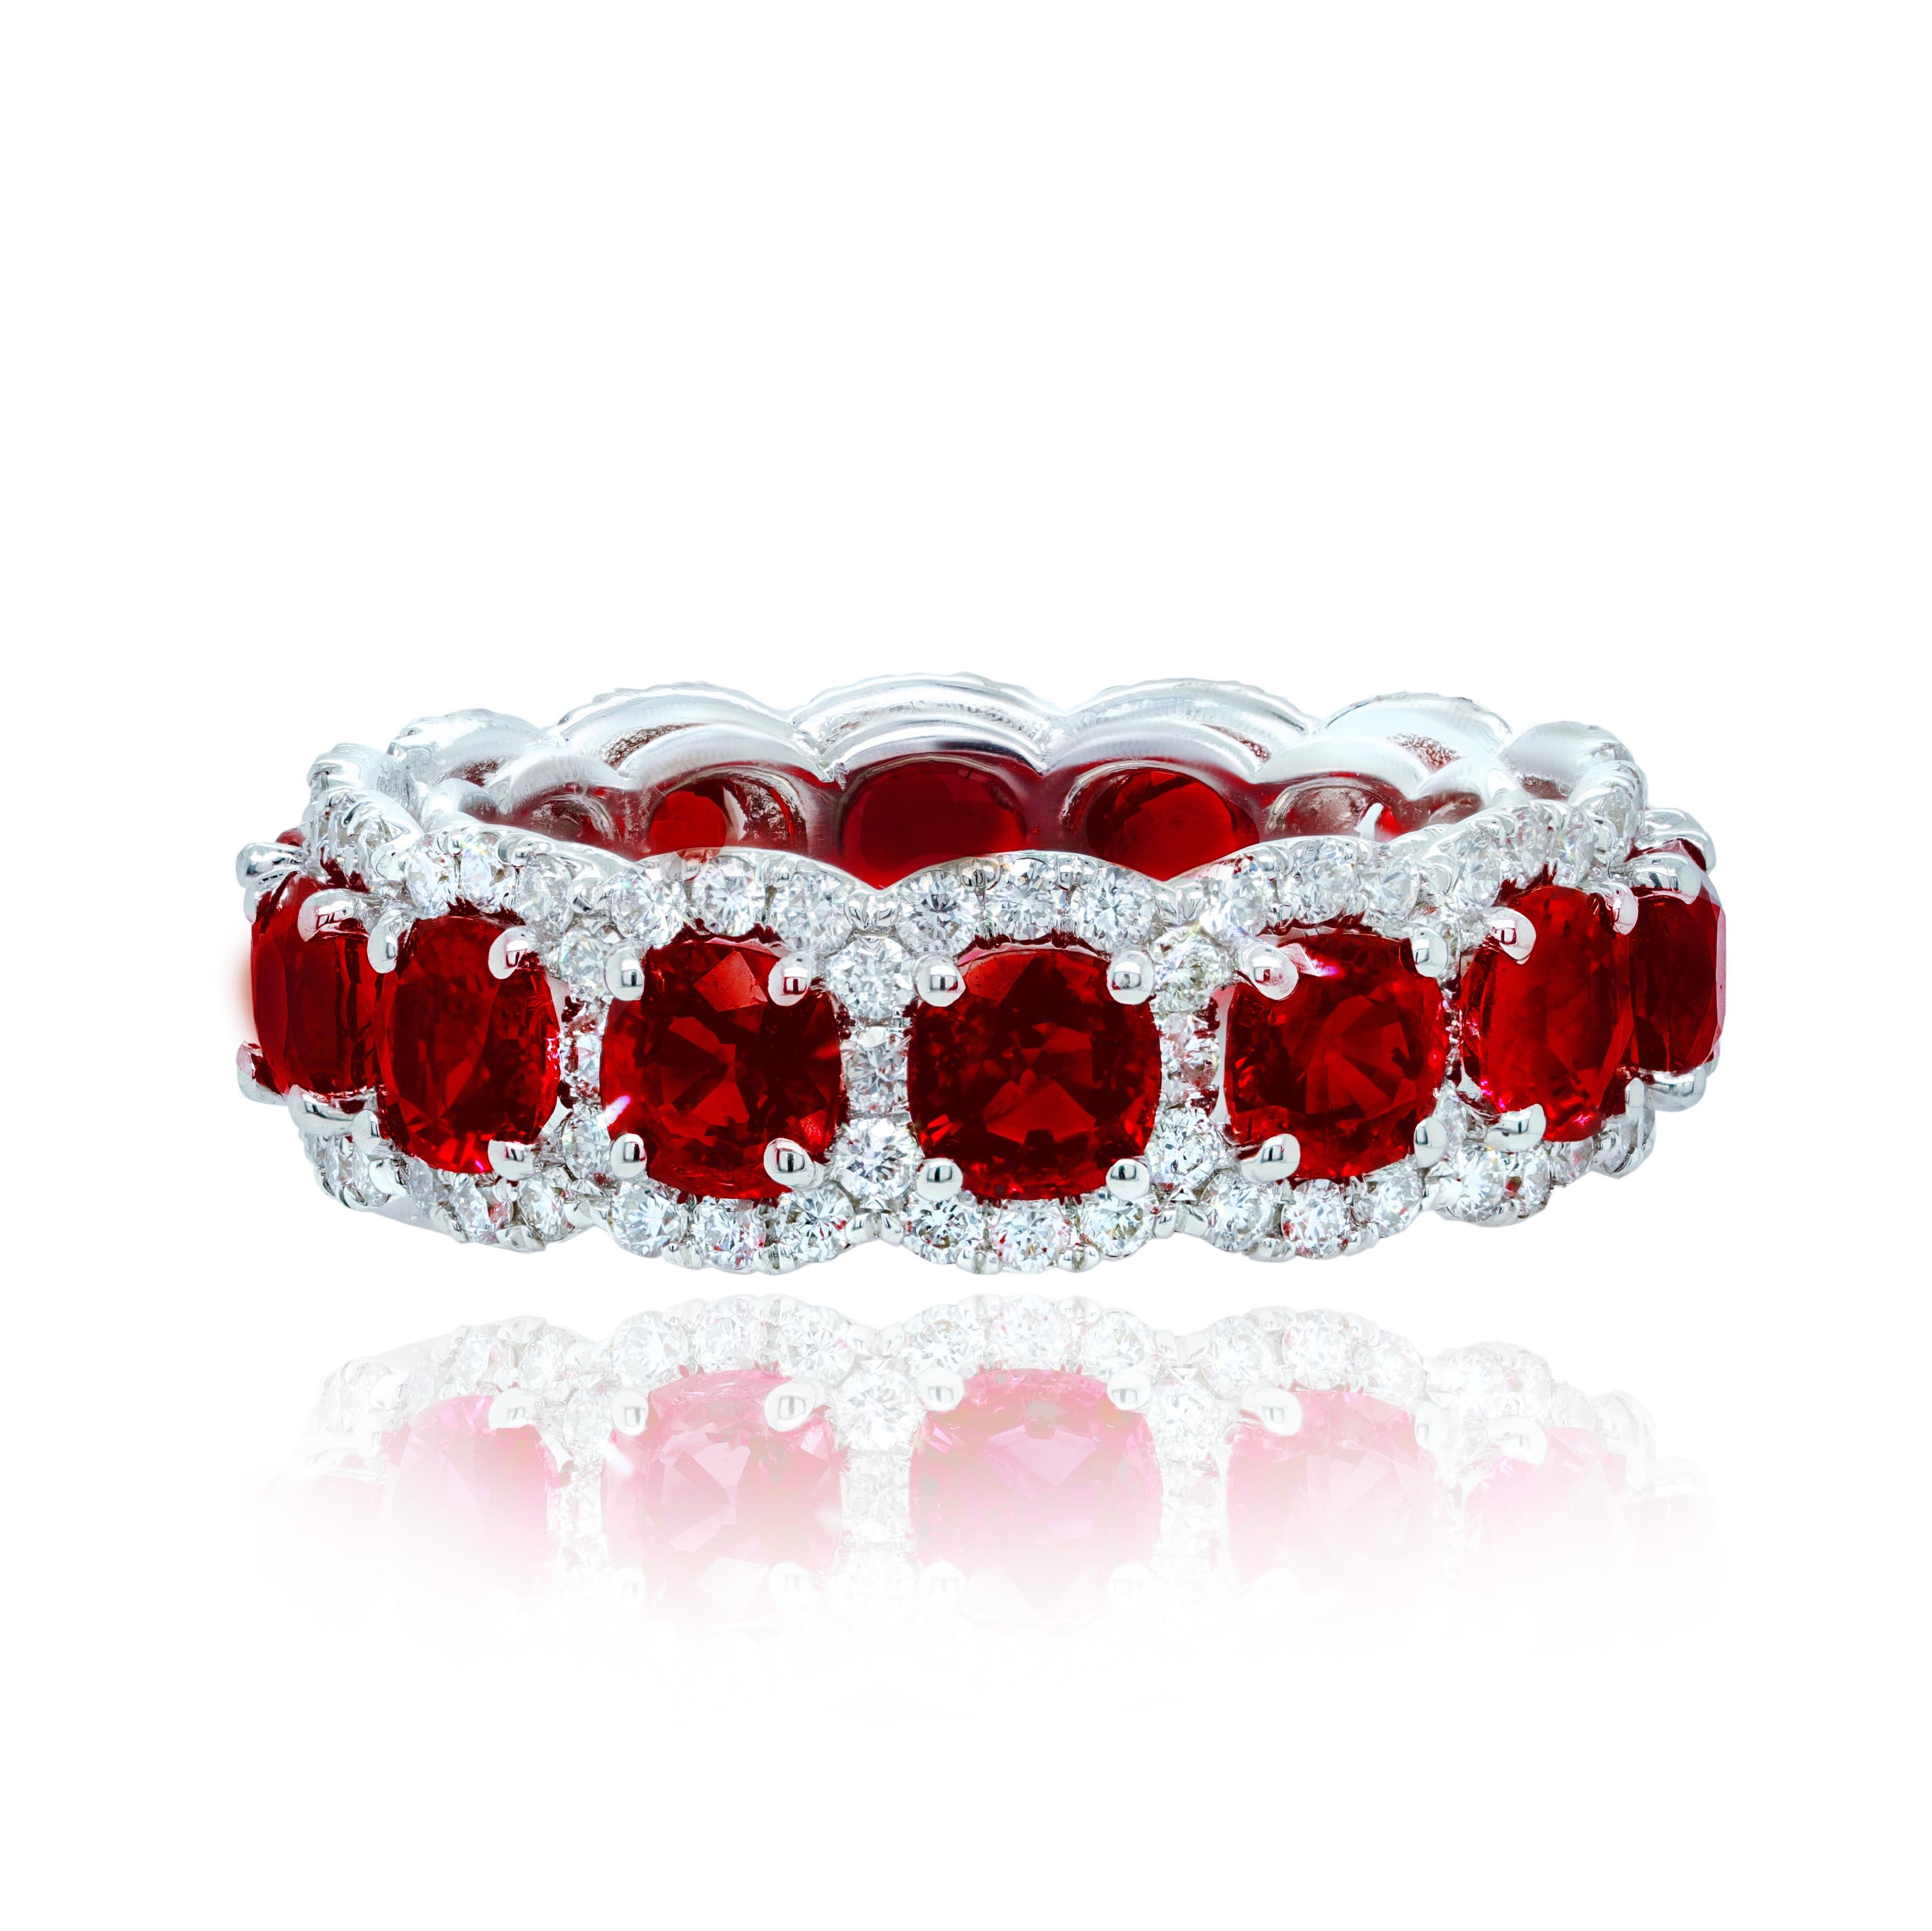 18 kt white gold ruby and diamond ring adorned with 5.40 cts tw of round pink rubies surrounded by 1.60 cts tw of round diamonds going all the way around in a halo design.
Diana M. is a leading supplier of top-quality fine jewelry for over 35